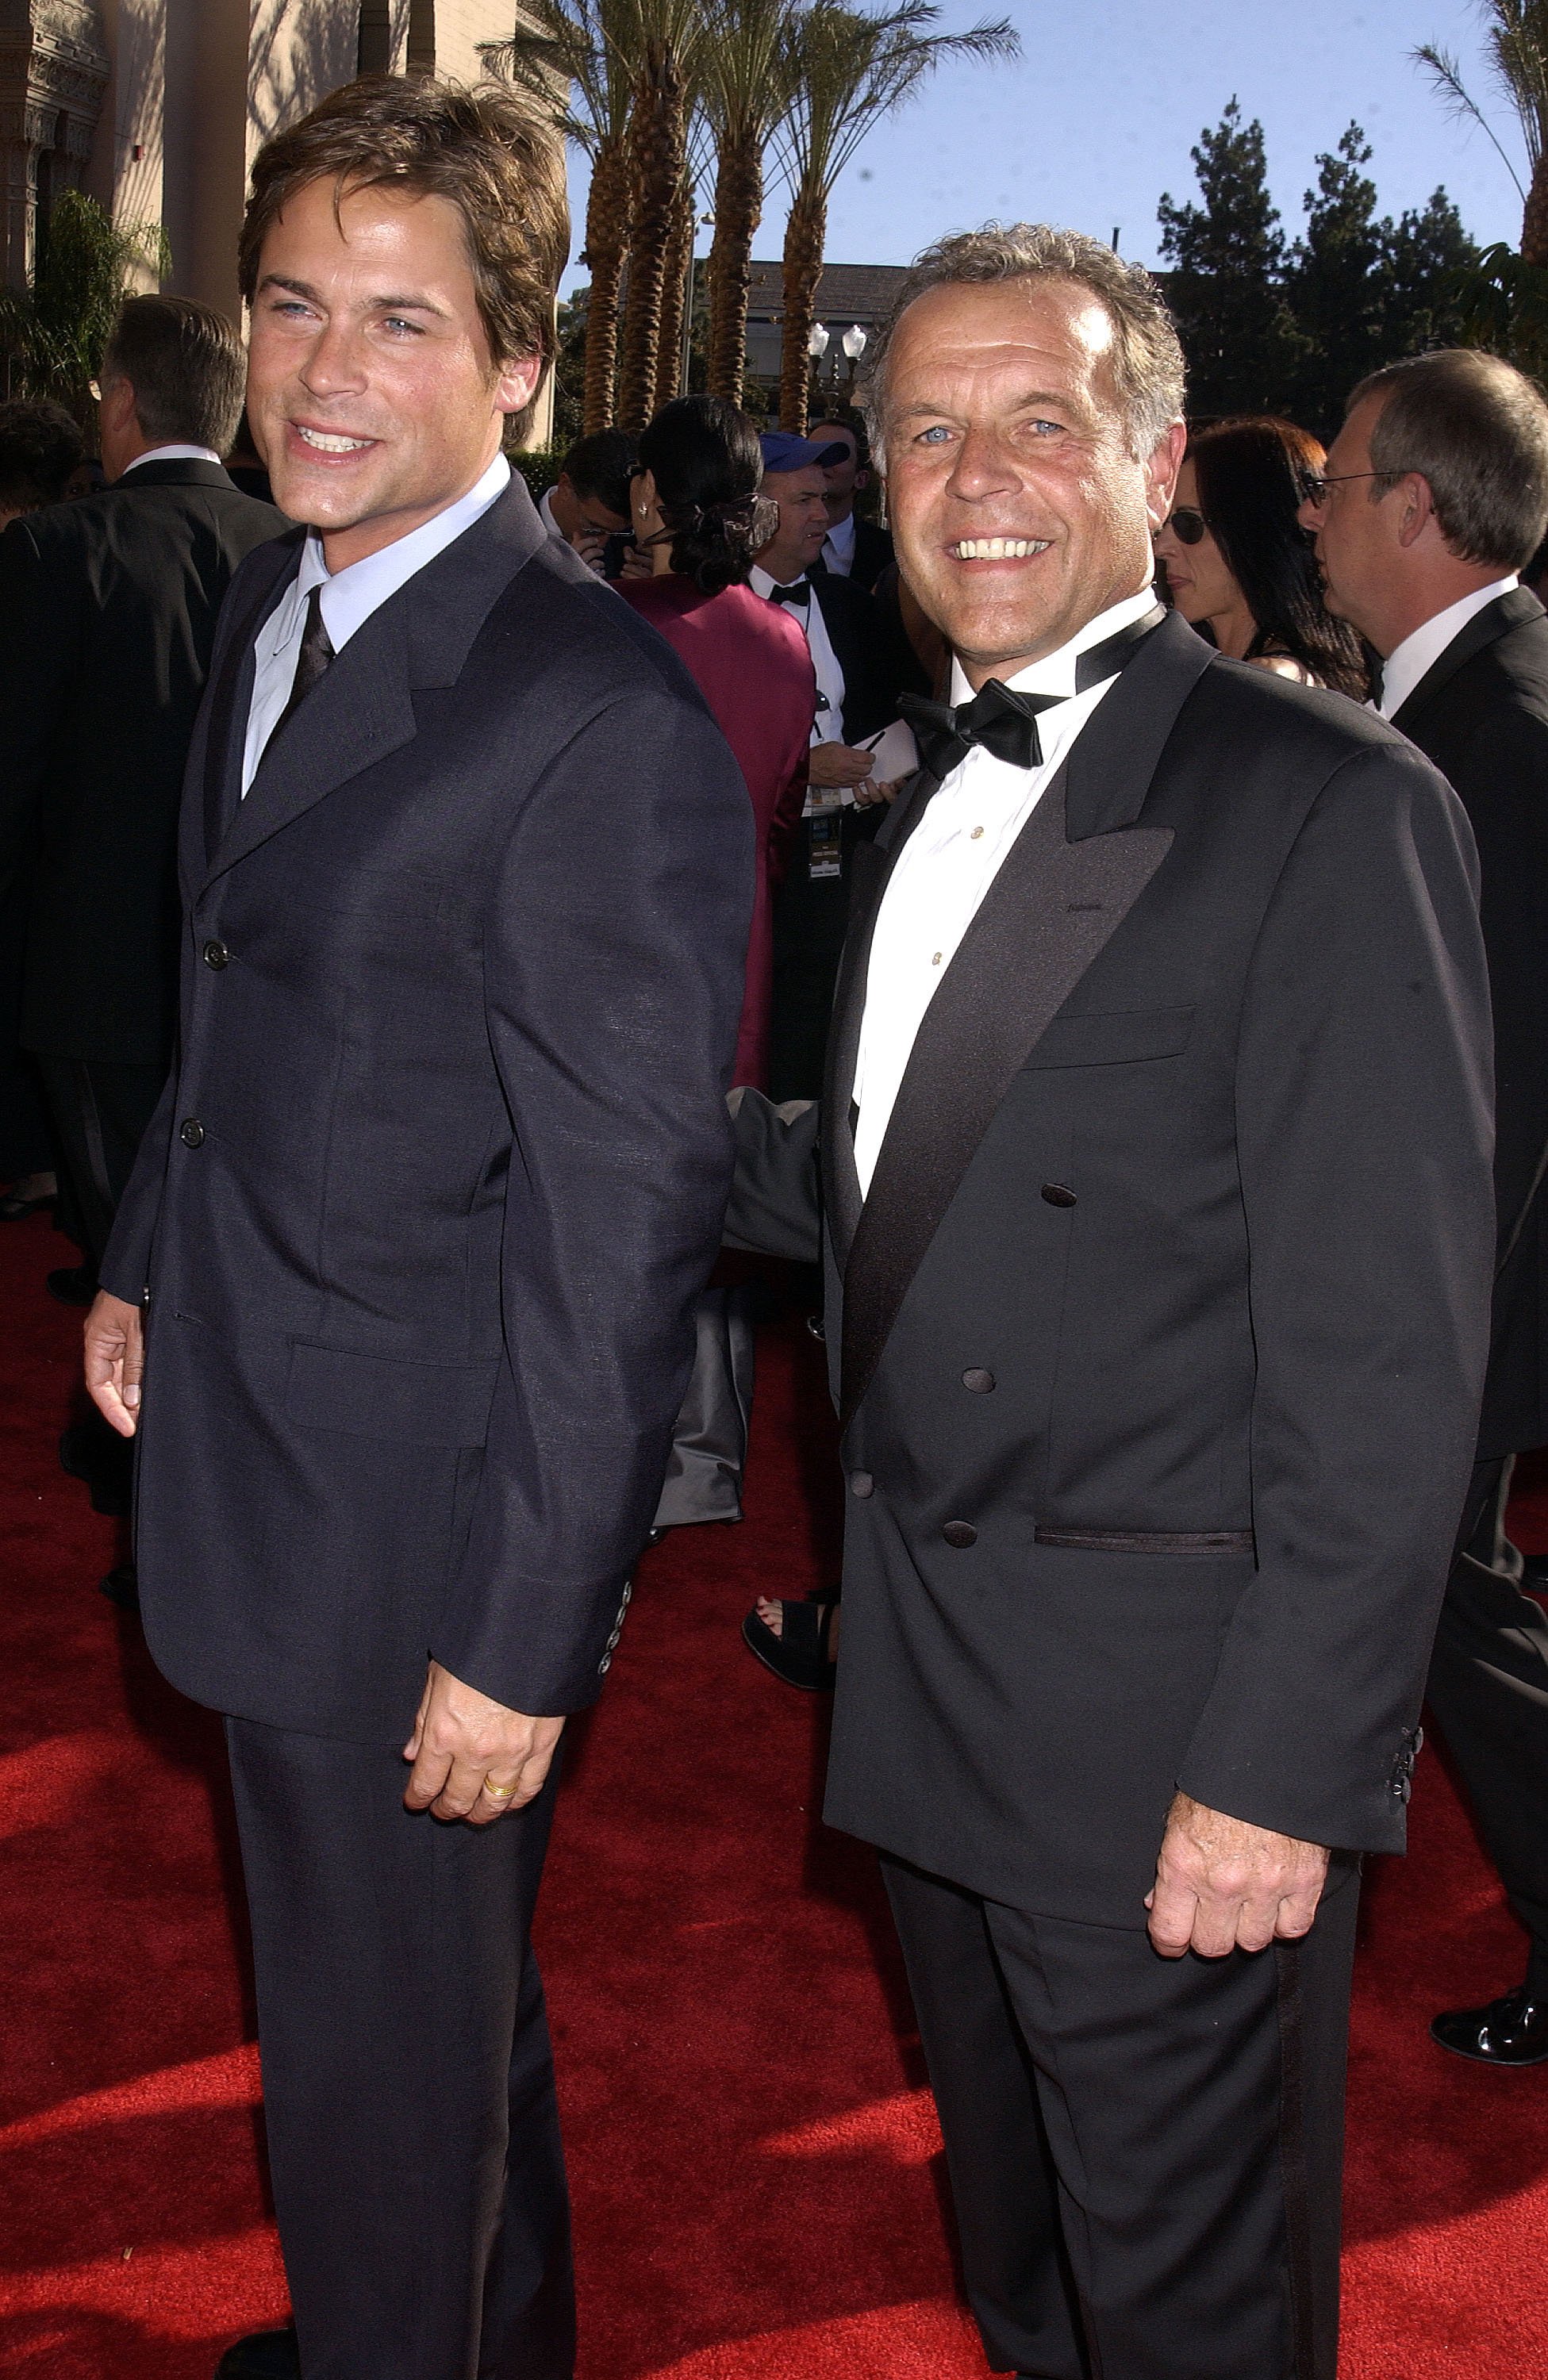 Rob Lowe and his father Charles Lowe at the Emmy Awards in California in 2002. | Source: Getty Images 